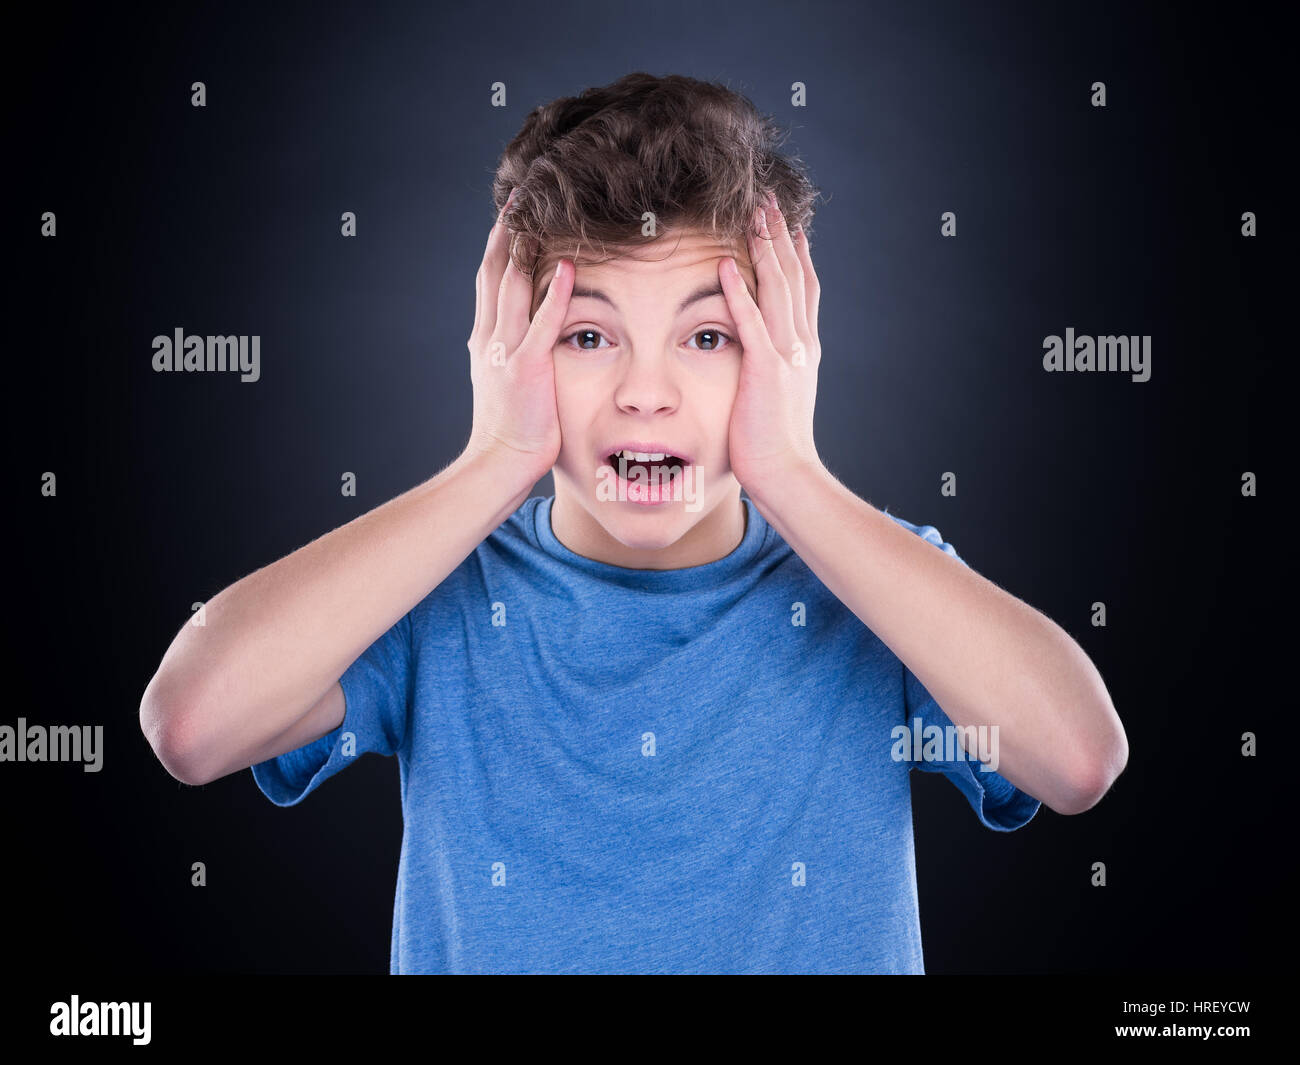 Emotional portrait of caucasian teen boy. Amazed teenager screaming looking at camera. Handsome surprised child, on black background. Stock Photo